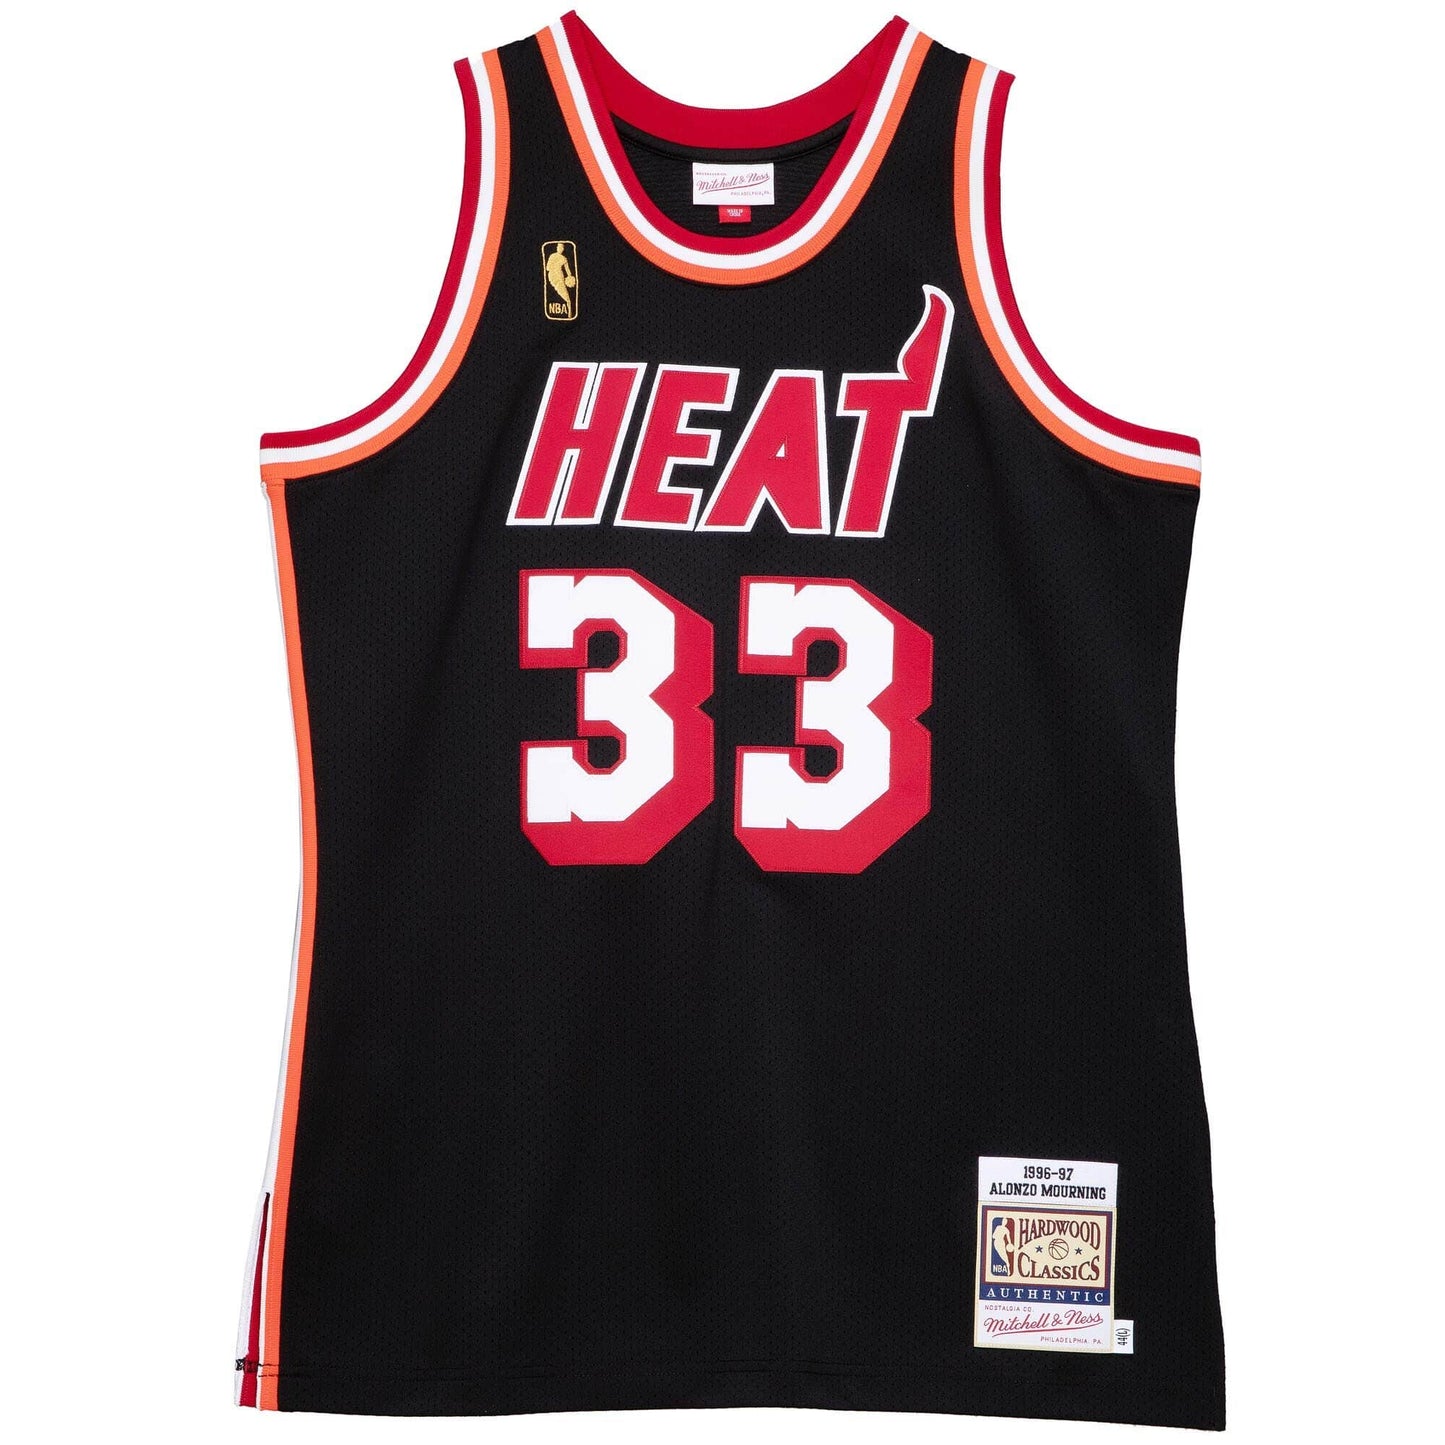 Authentic Alonzo Mourning Miami Heat 1996-97 Jersey